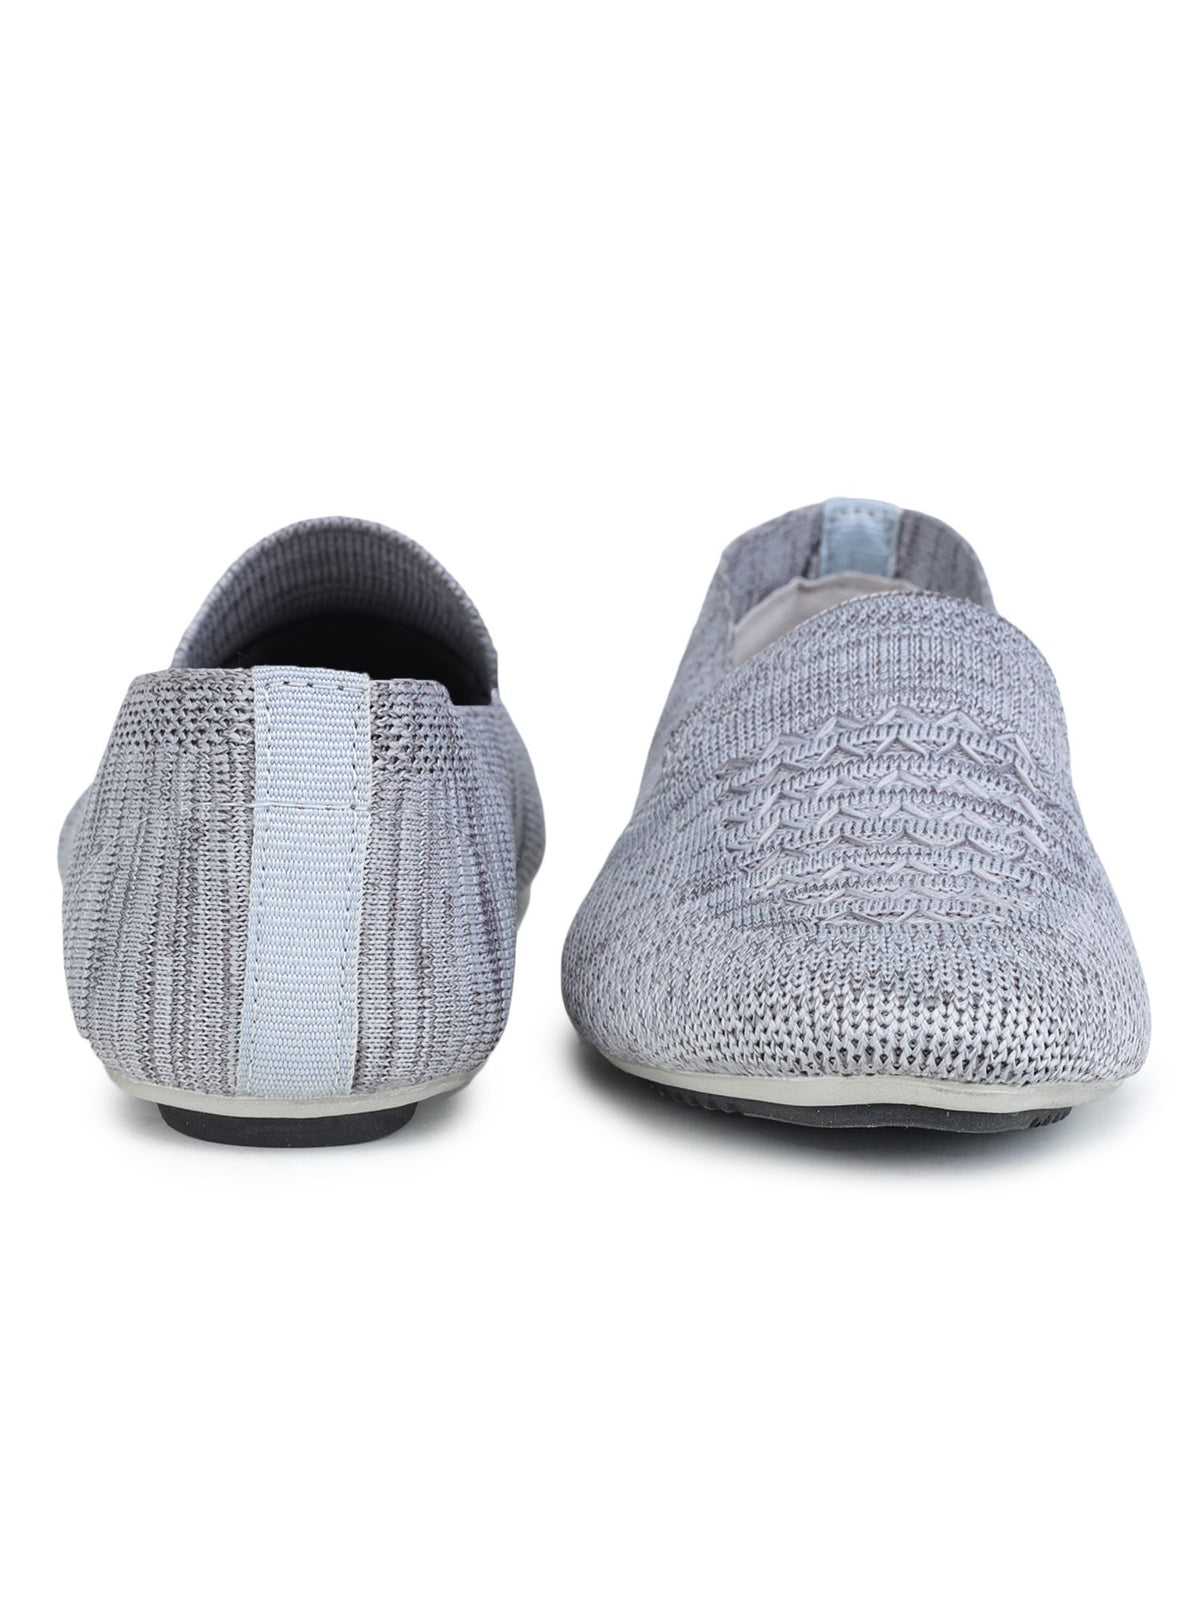 Grey Solid Textile Slip On Casual Bellies for Women